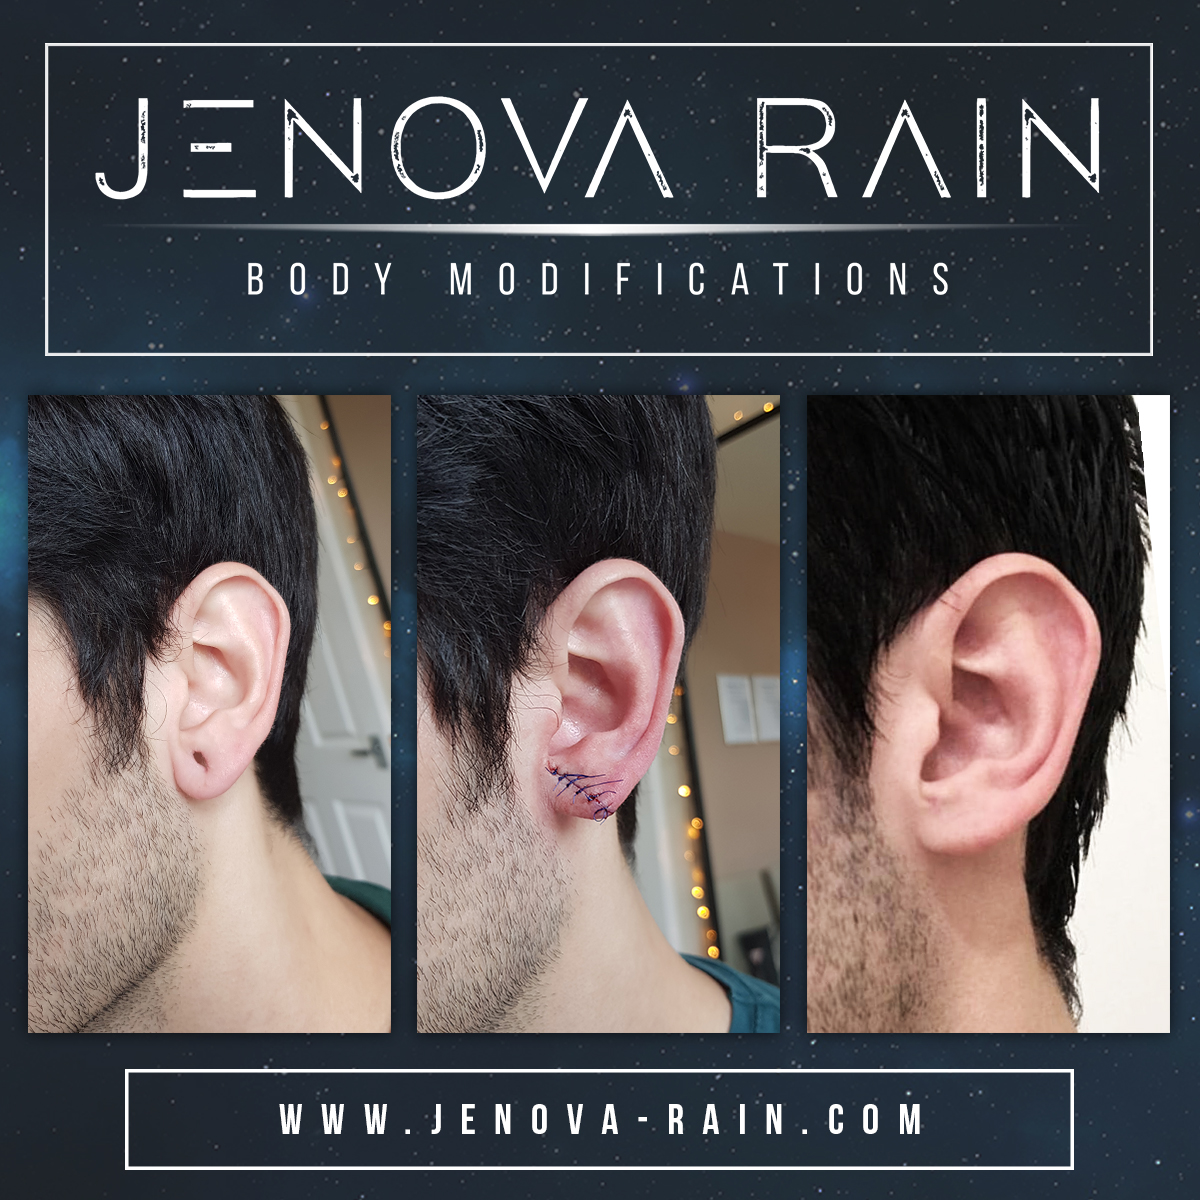 Before and after healed photos of surgery procedure to fix stretched ear lobes